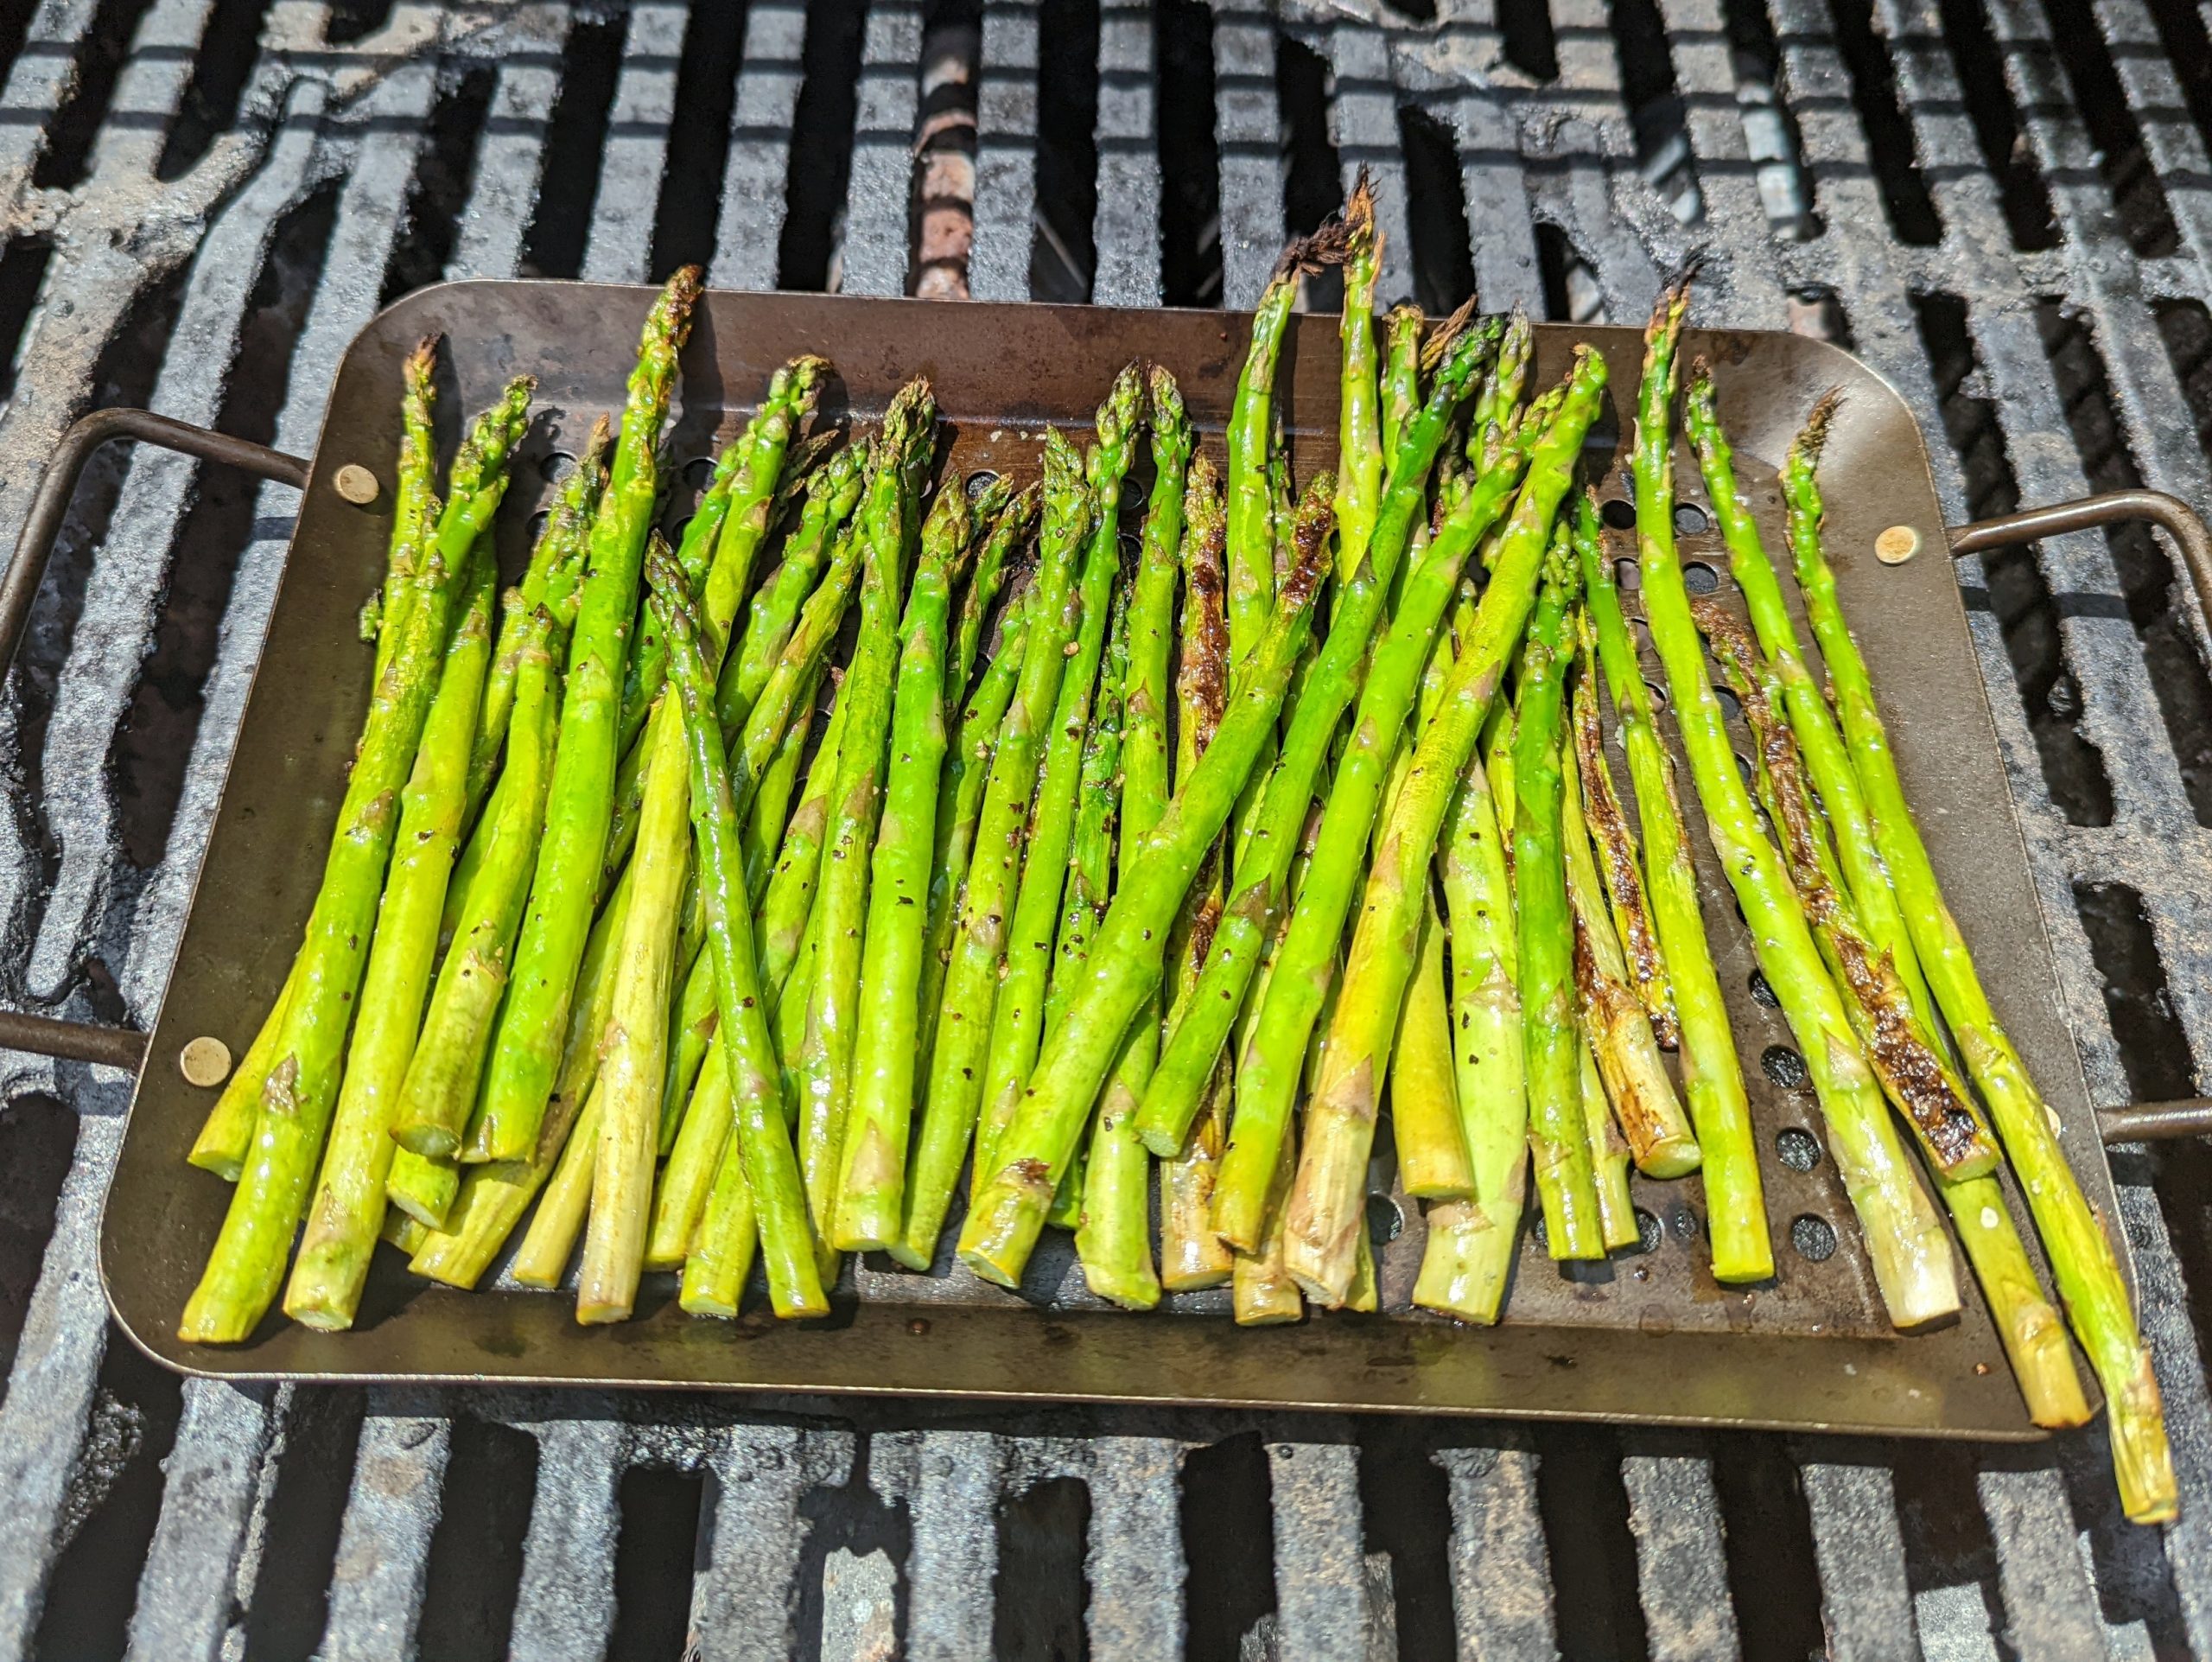 Grill the asparagus in a vegetable basket.